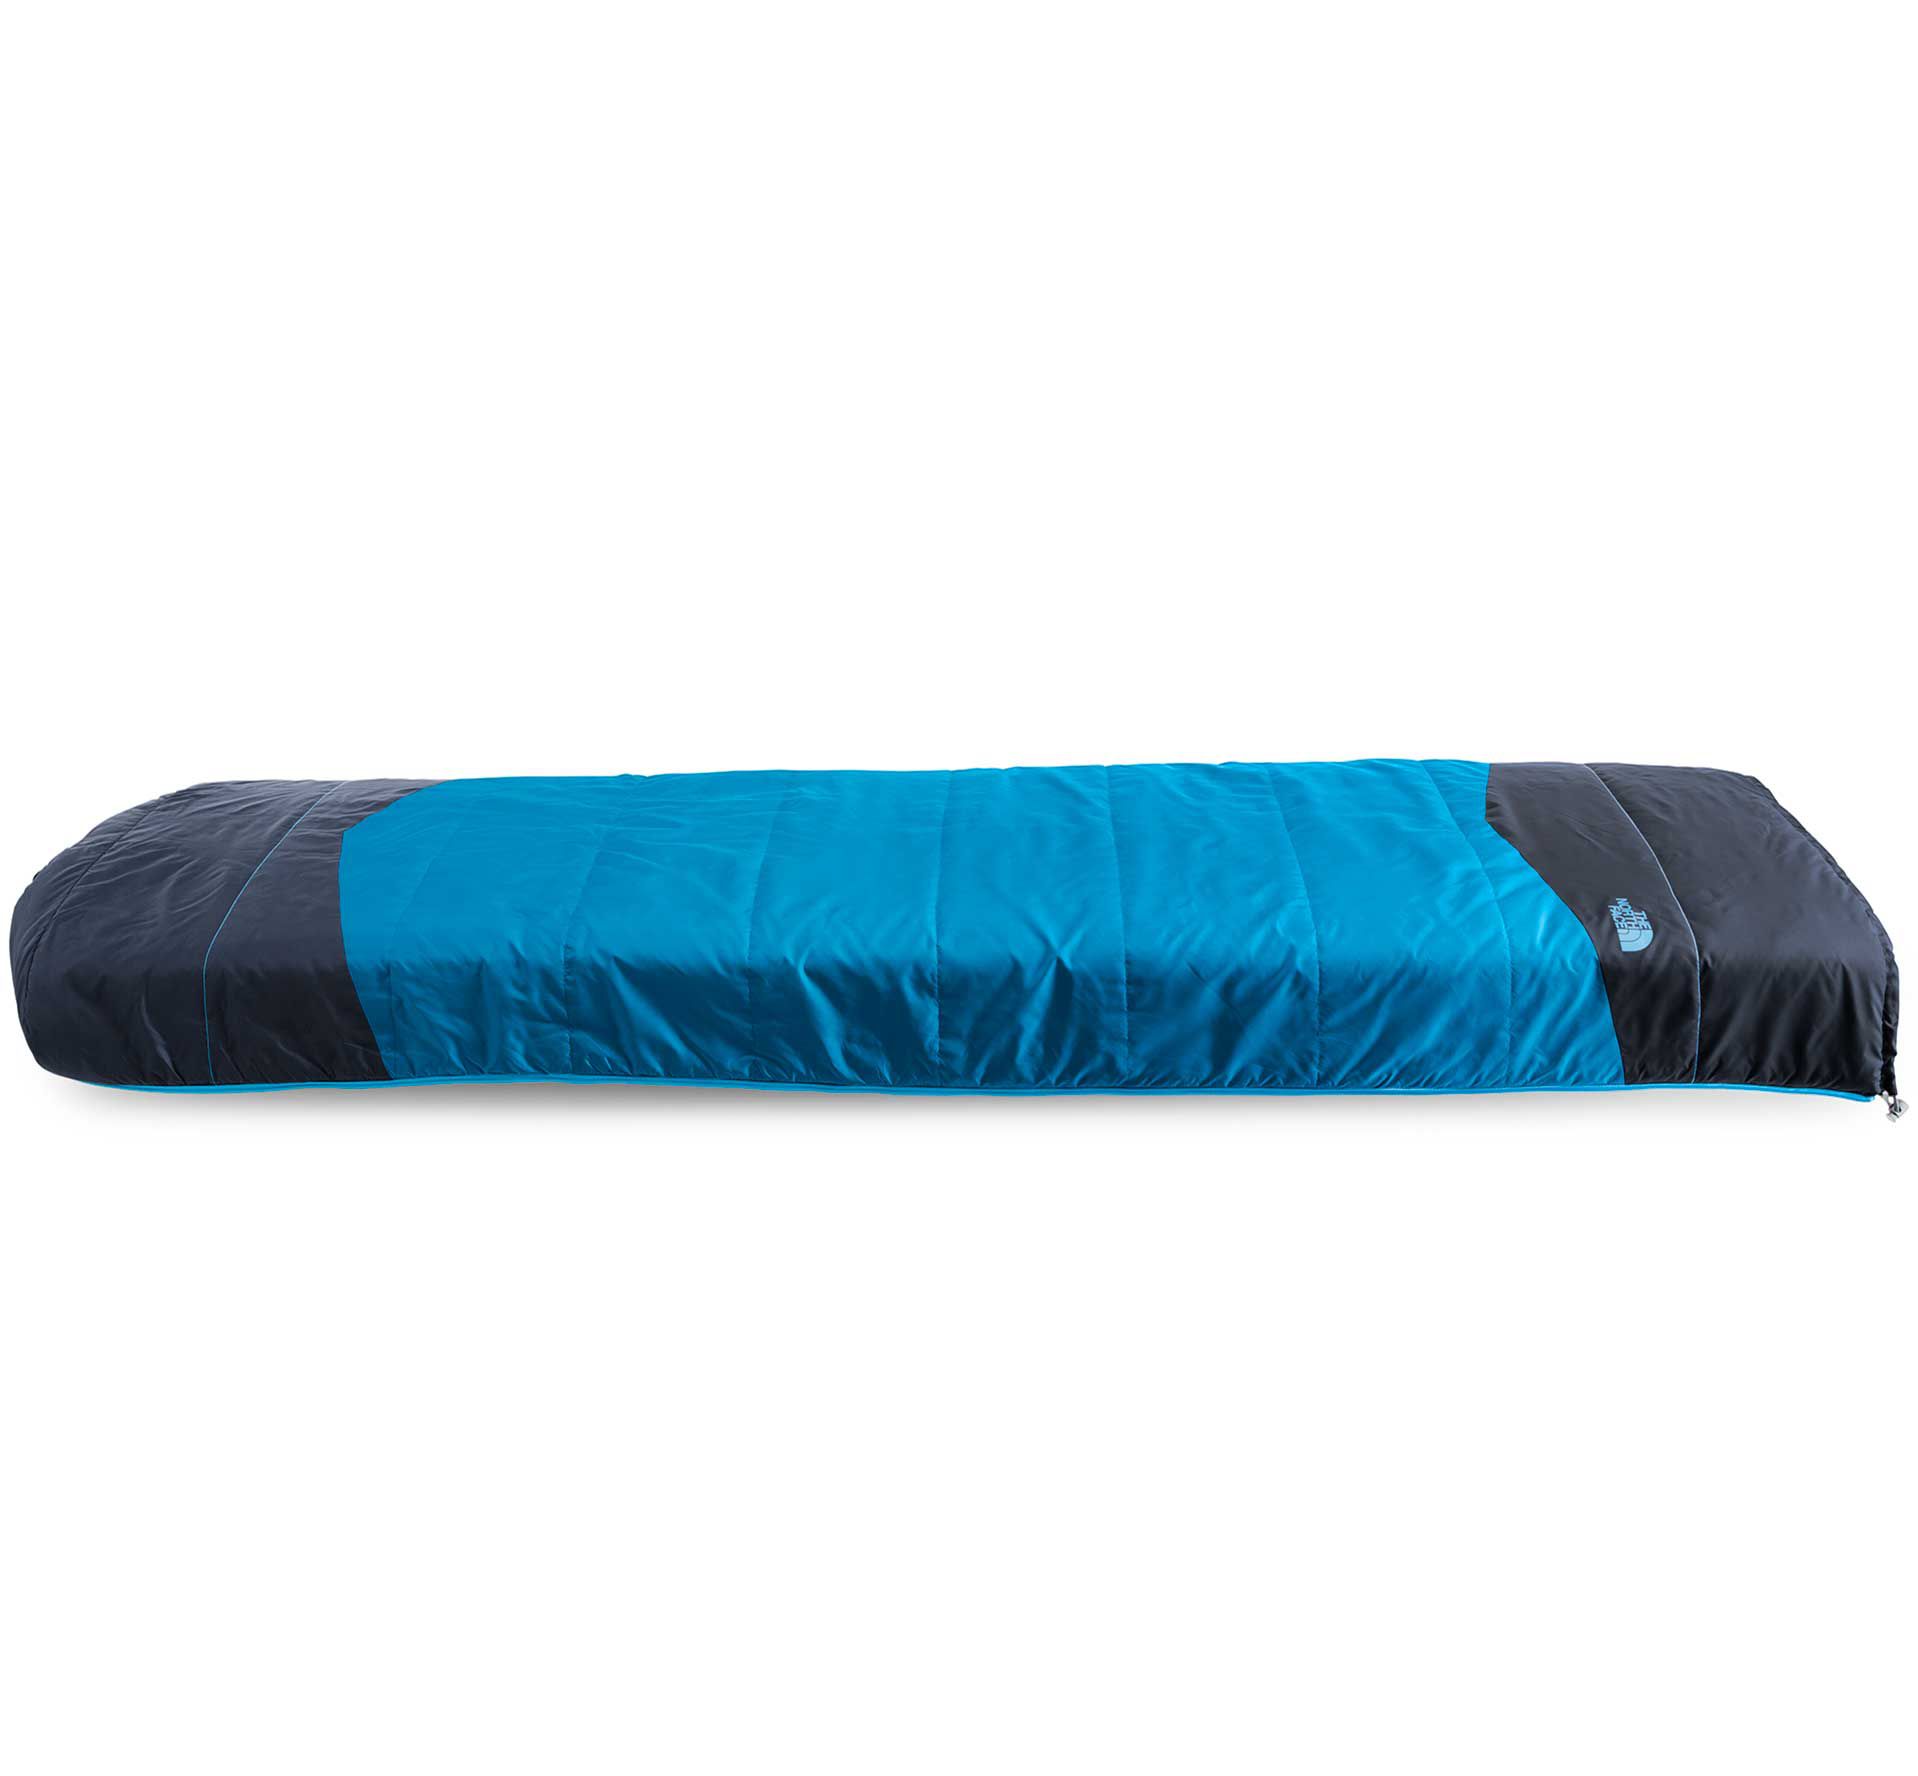 north face one sleeping bag